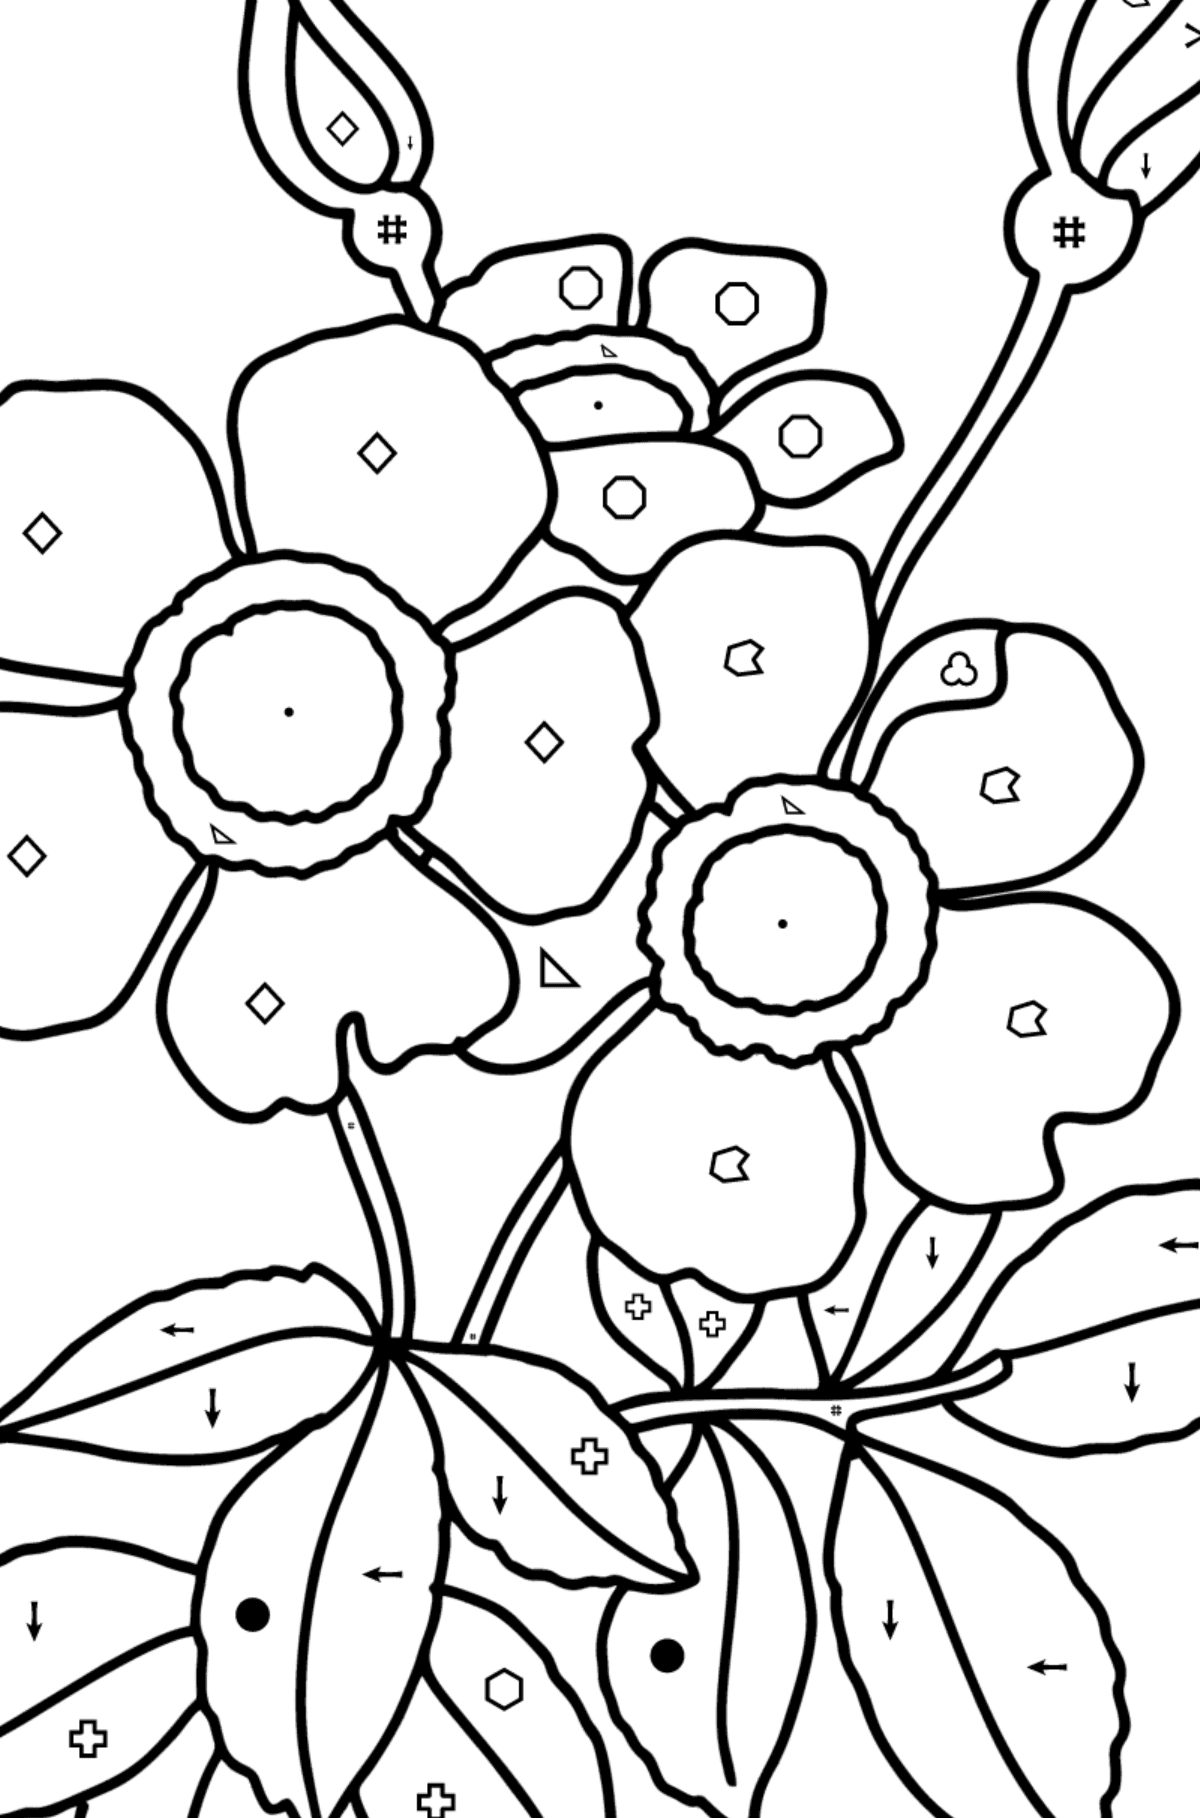 Spray rose coloring page - Coloring by Symbols and Geometric Shapes for Kids